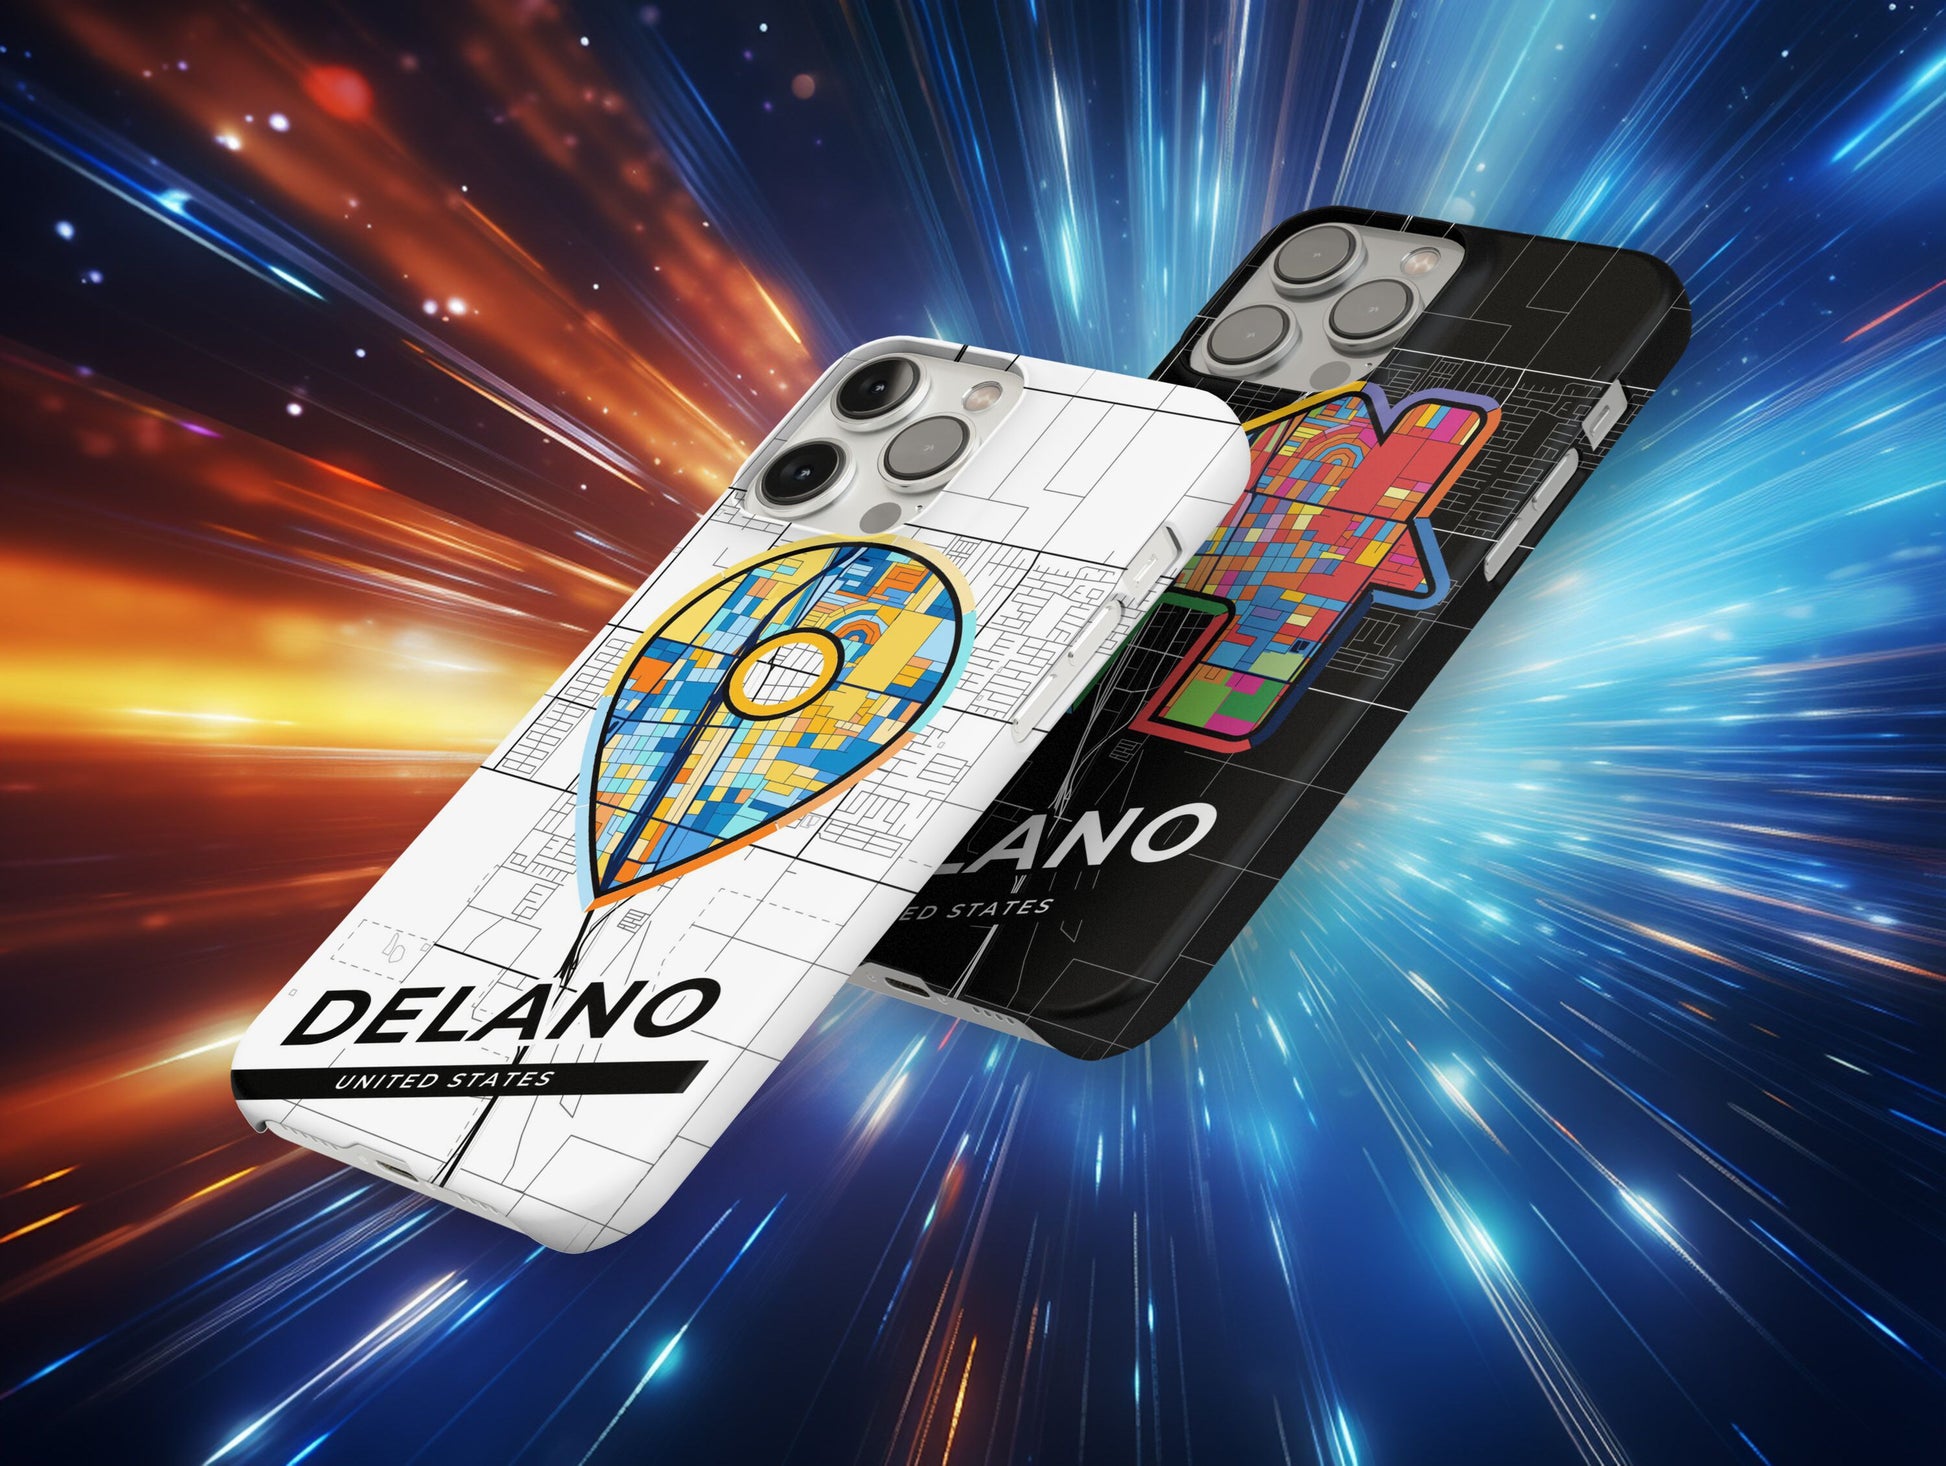 Delano California slim phone case with colorful icon. Birthday, wedding or housewarming gift. Couple match cases.